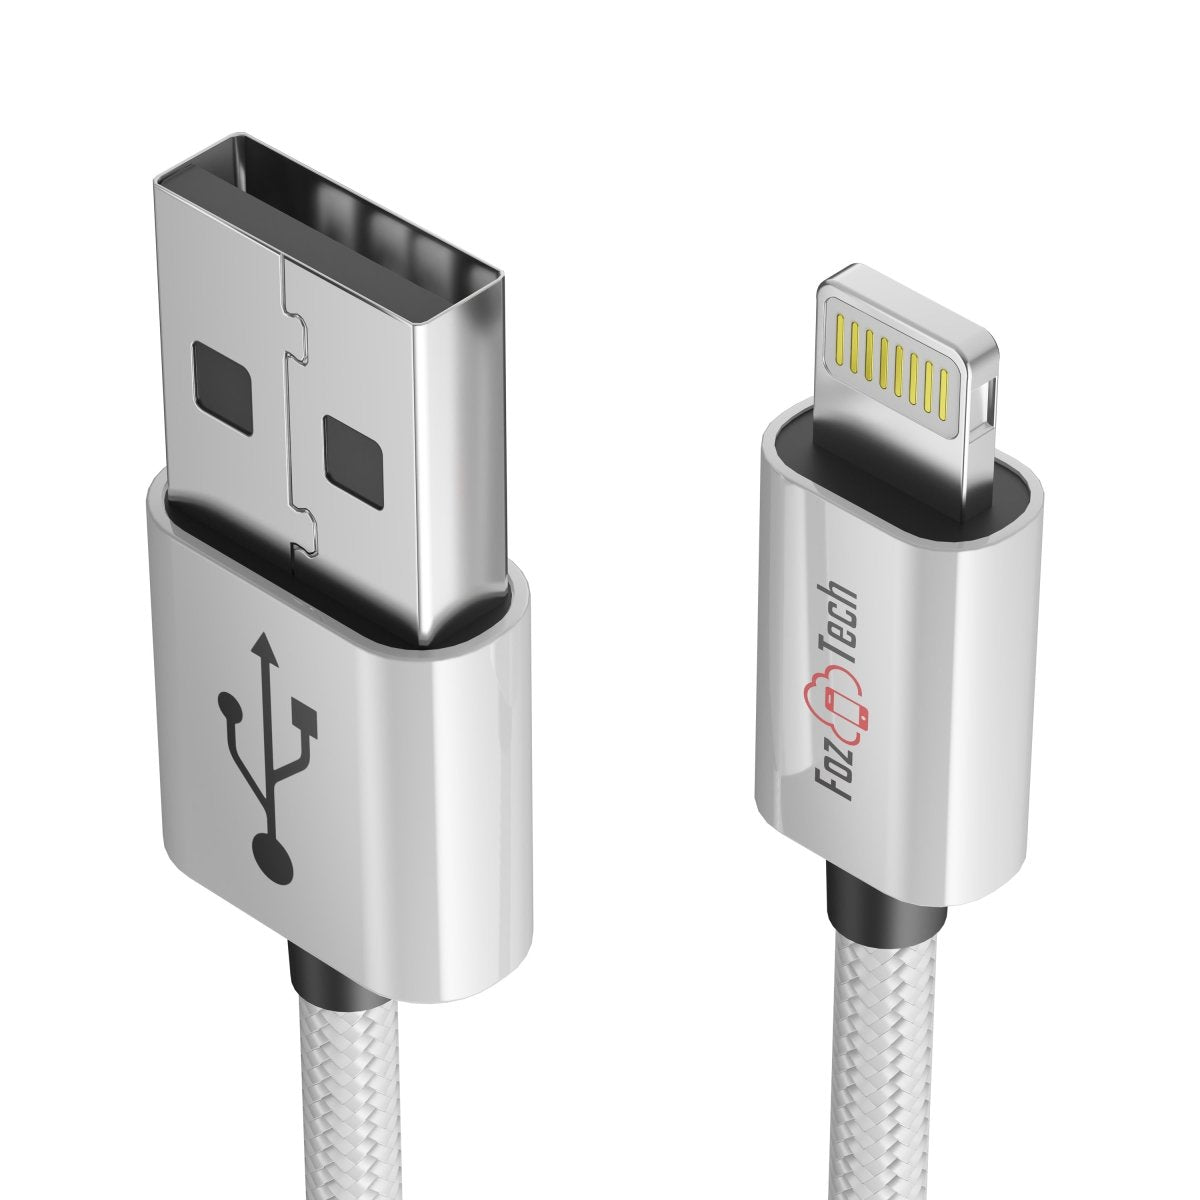 FozTech - CORE Series - USB Charger Cable Data Sync Lead for iPhone, iPad, iPod - Silver - USB Cable - FozTech Official Store